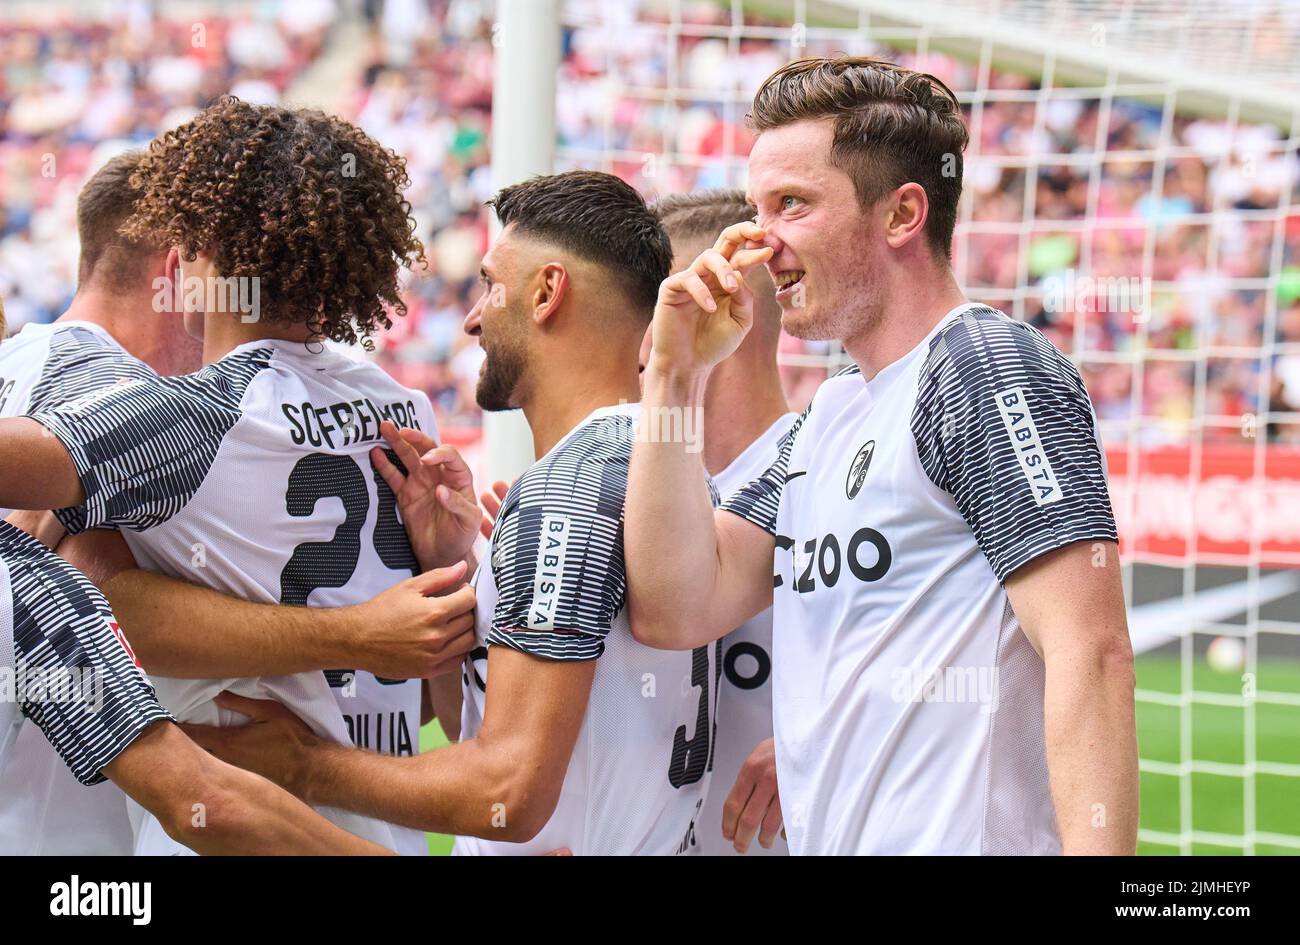 Michael Gregoritsch, FRG 38 celebrates his goal, happy, laugh, celebration, 0-1 with Kiliann Sildillia, FRG 25  in the match FC AUGSBURG - SC FREIBURG 0-4 1.German Football League on Aug 06, 2022 in Augsburg, Germany. Season 2022/2023, matchday 1, 1.Bundesliga, FCB, Munich, 1.Spieltag © Peter Schatz / Alamy Live News    - DFL REGULATIONS PROHIBIT ANY USE OF PHOTOGRAPHS as IMAGE SEQUENCES and/or QUASI-VIDEO - Stock Photo